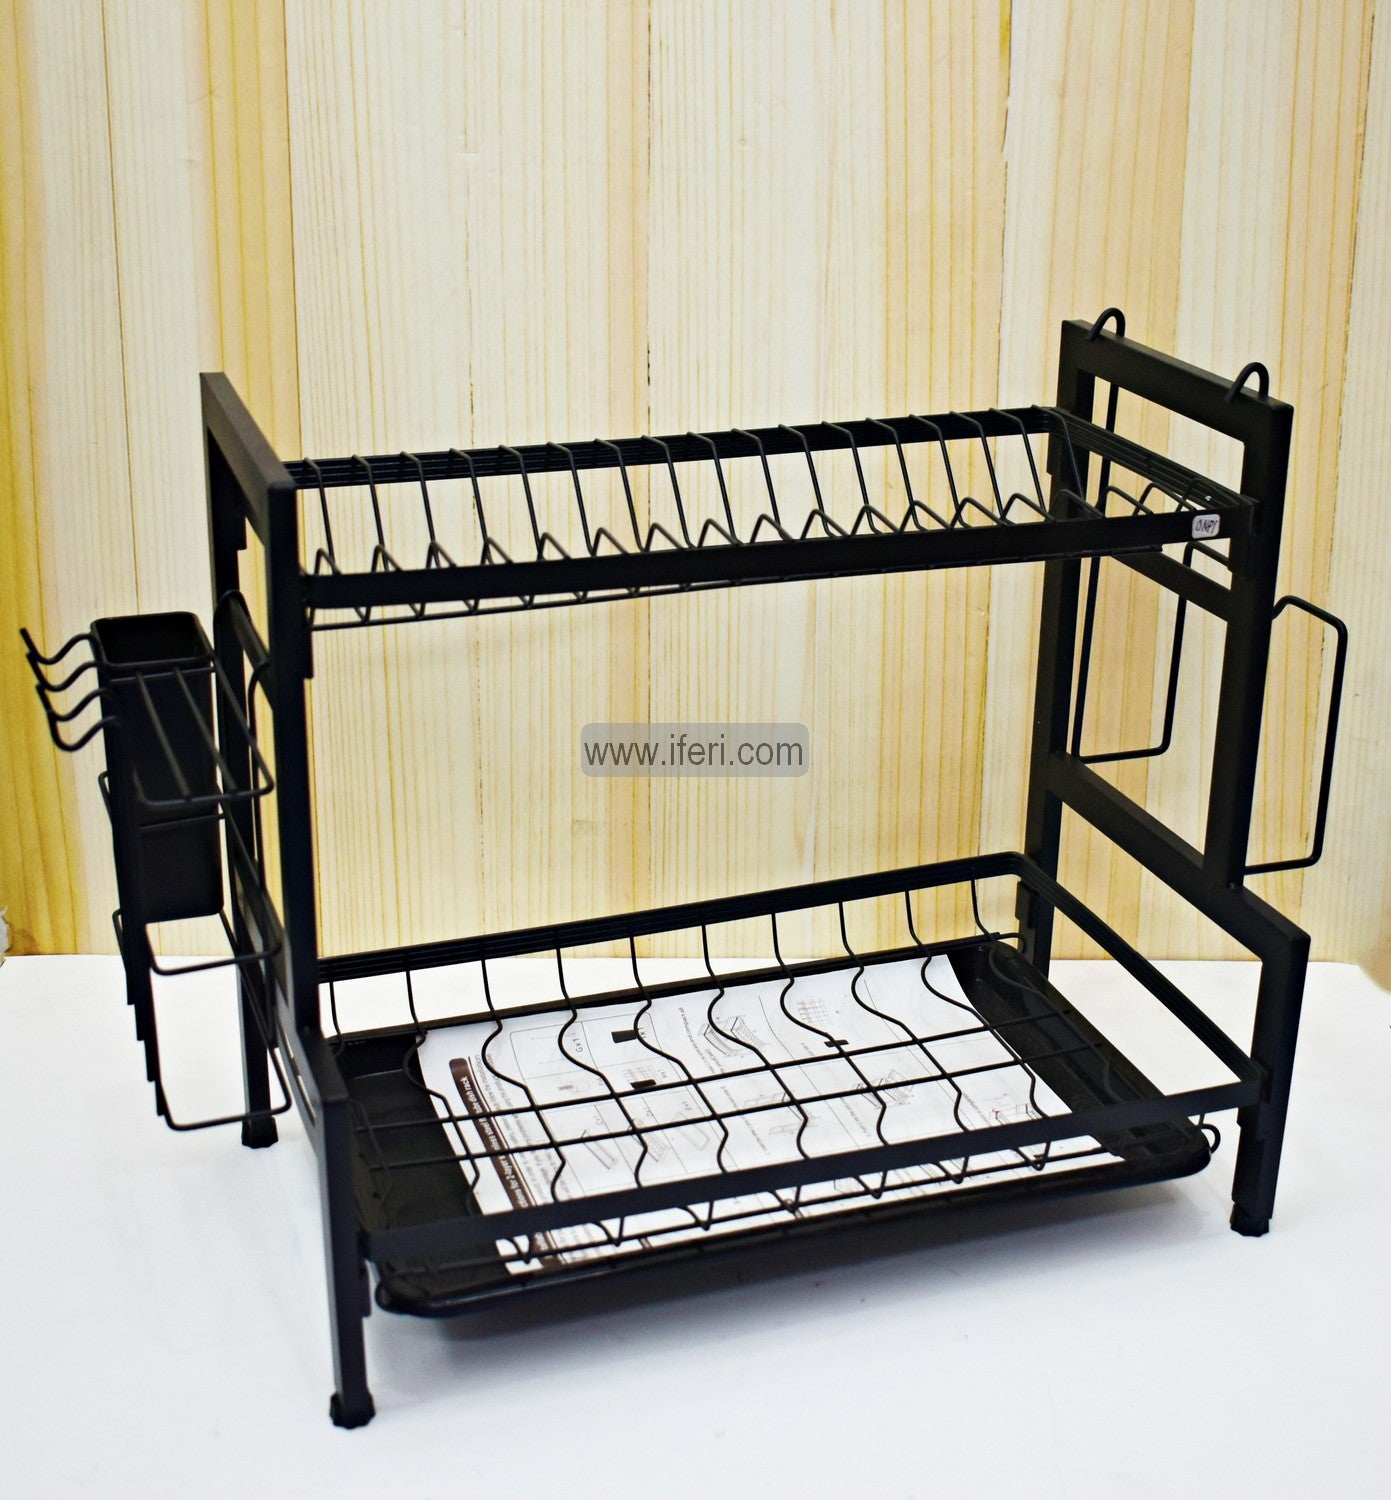 2 Tier Stainless Steel Dish Drying Storage Rack with Holder ALP0477